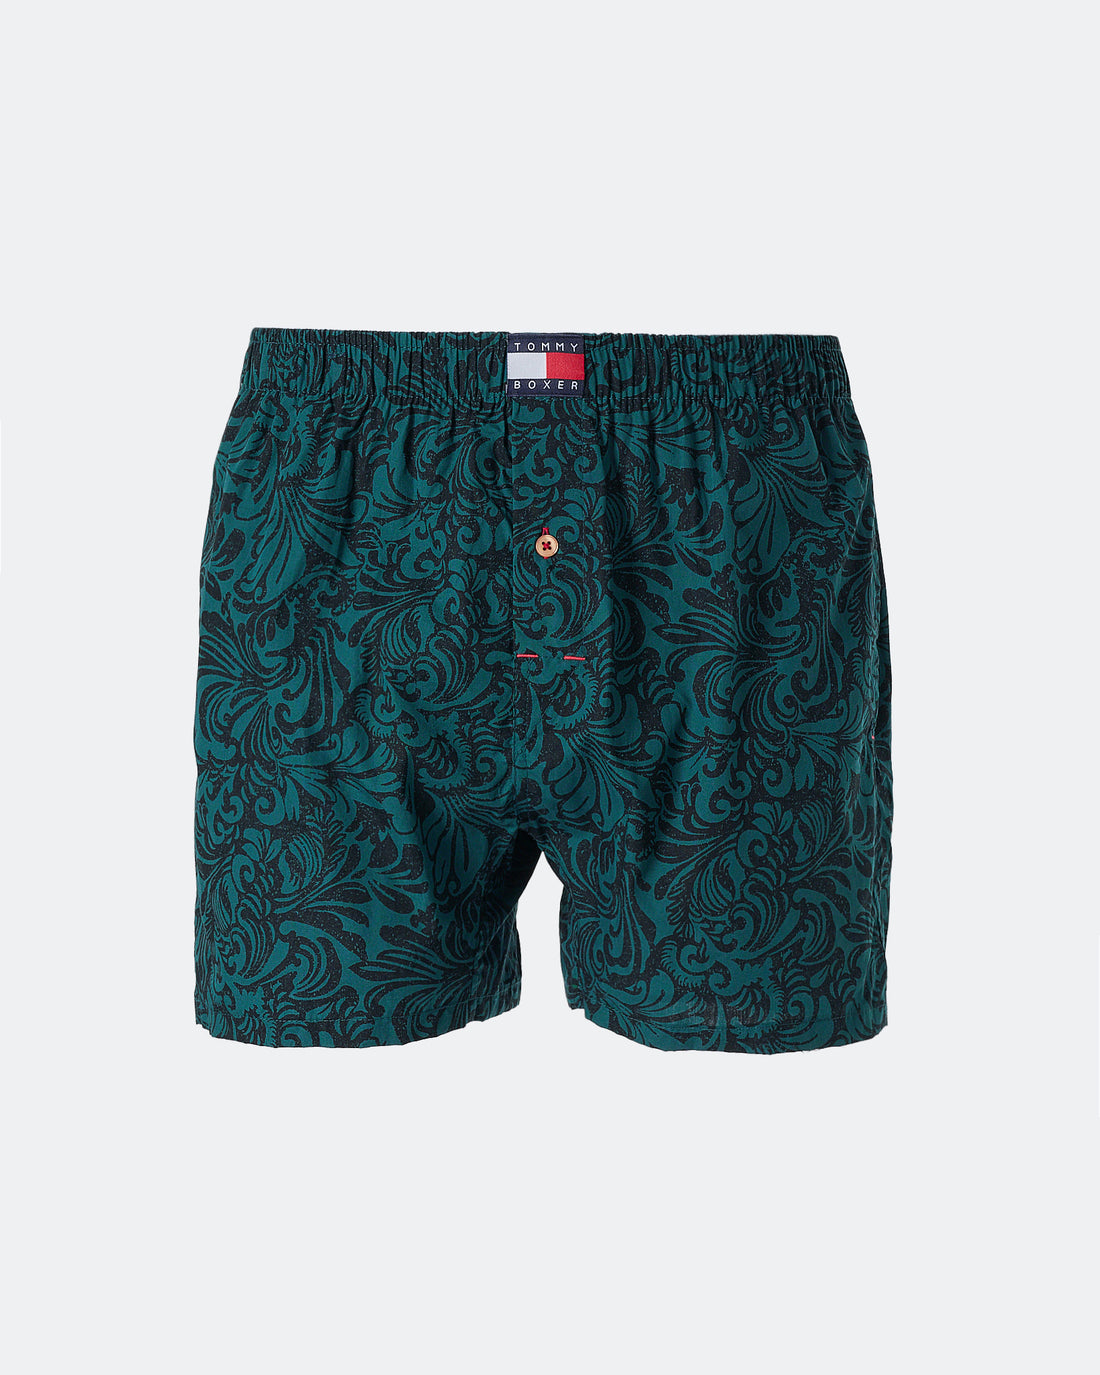 TH Floral Over Printed Men Boxer 5.90